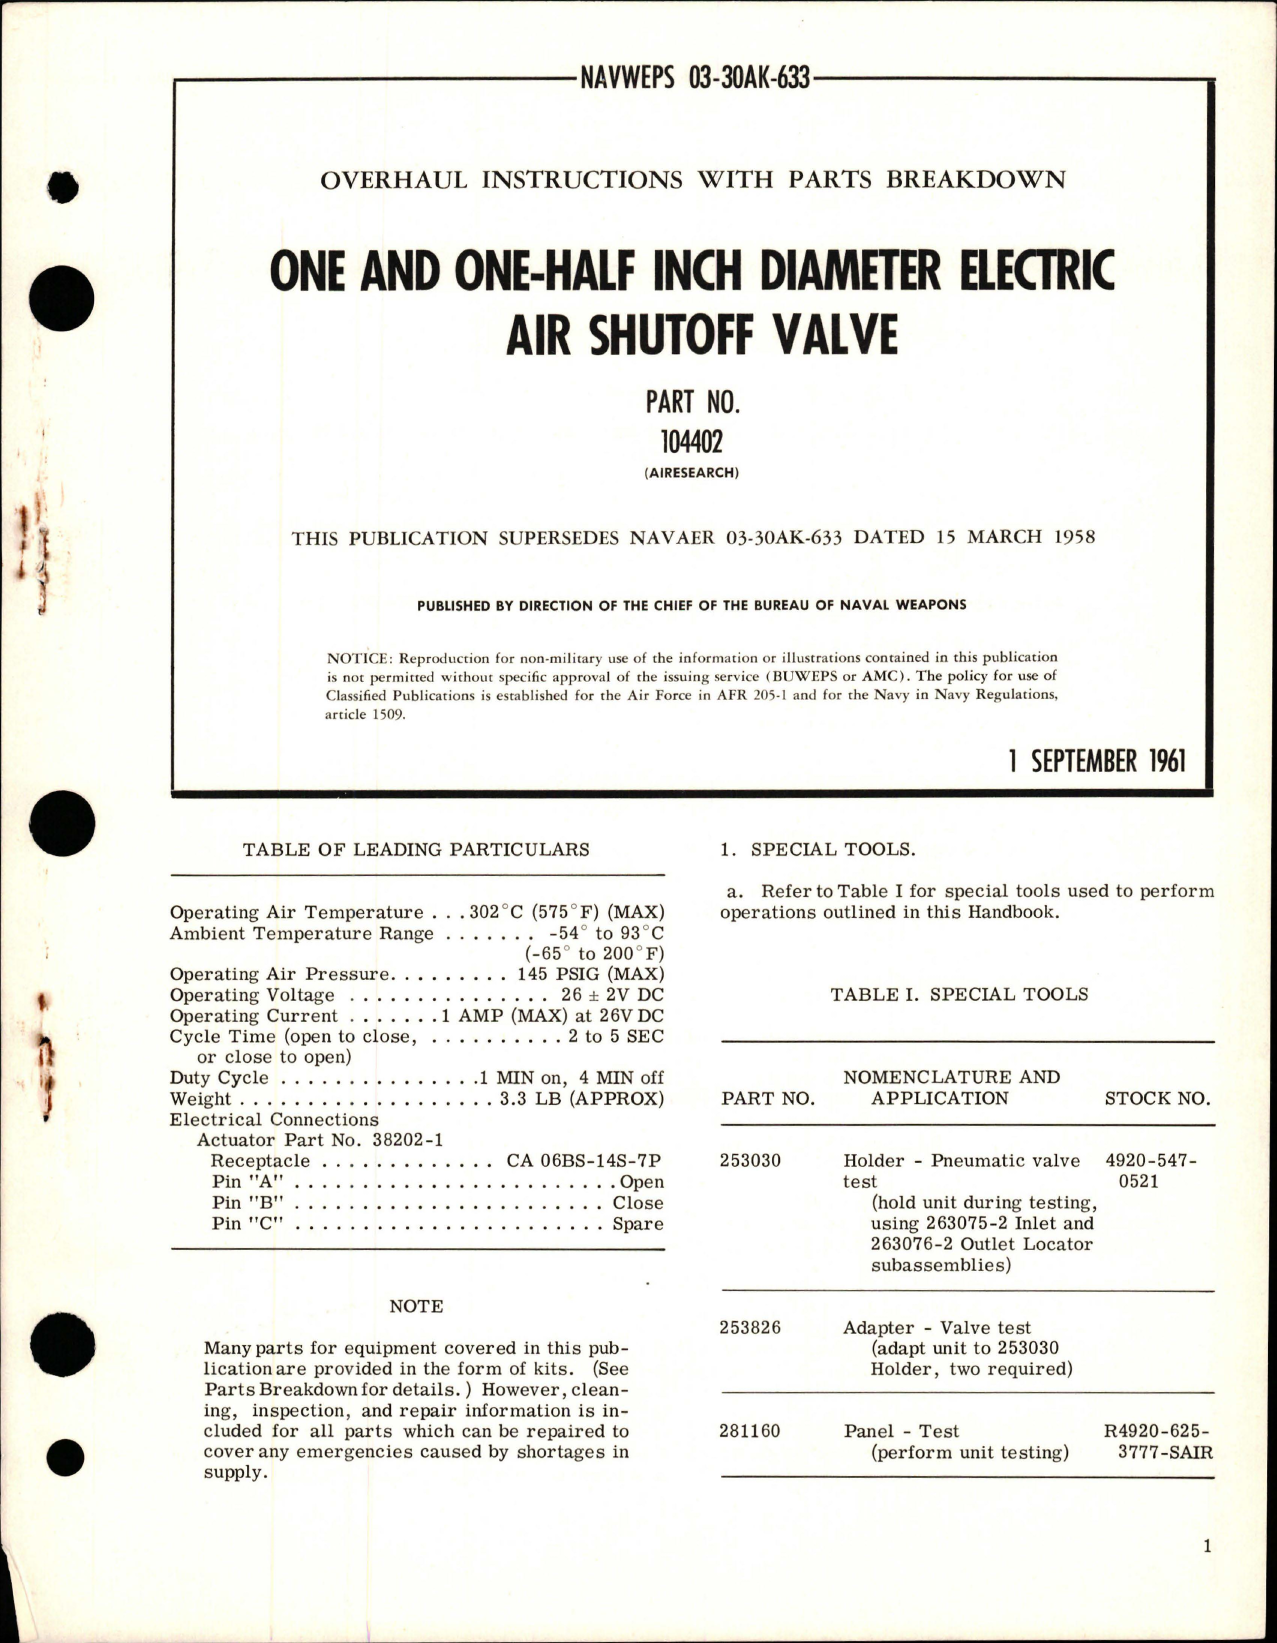 Sample page 1 from AirCorps Library document: Overhaul Instructions with Parts Breakdown for Electric Air Shutoff Valve 1 1/2